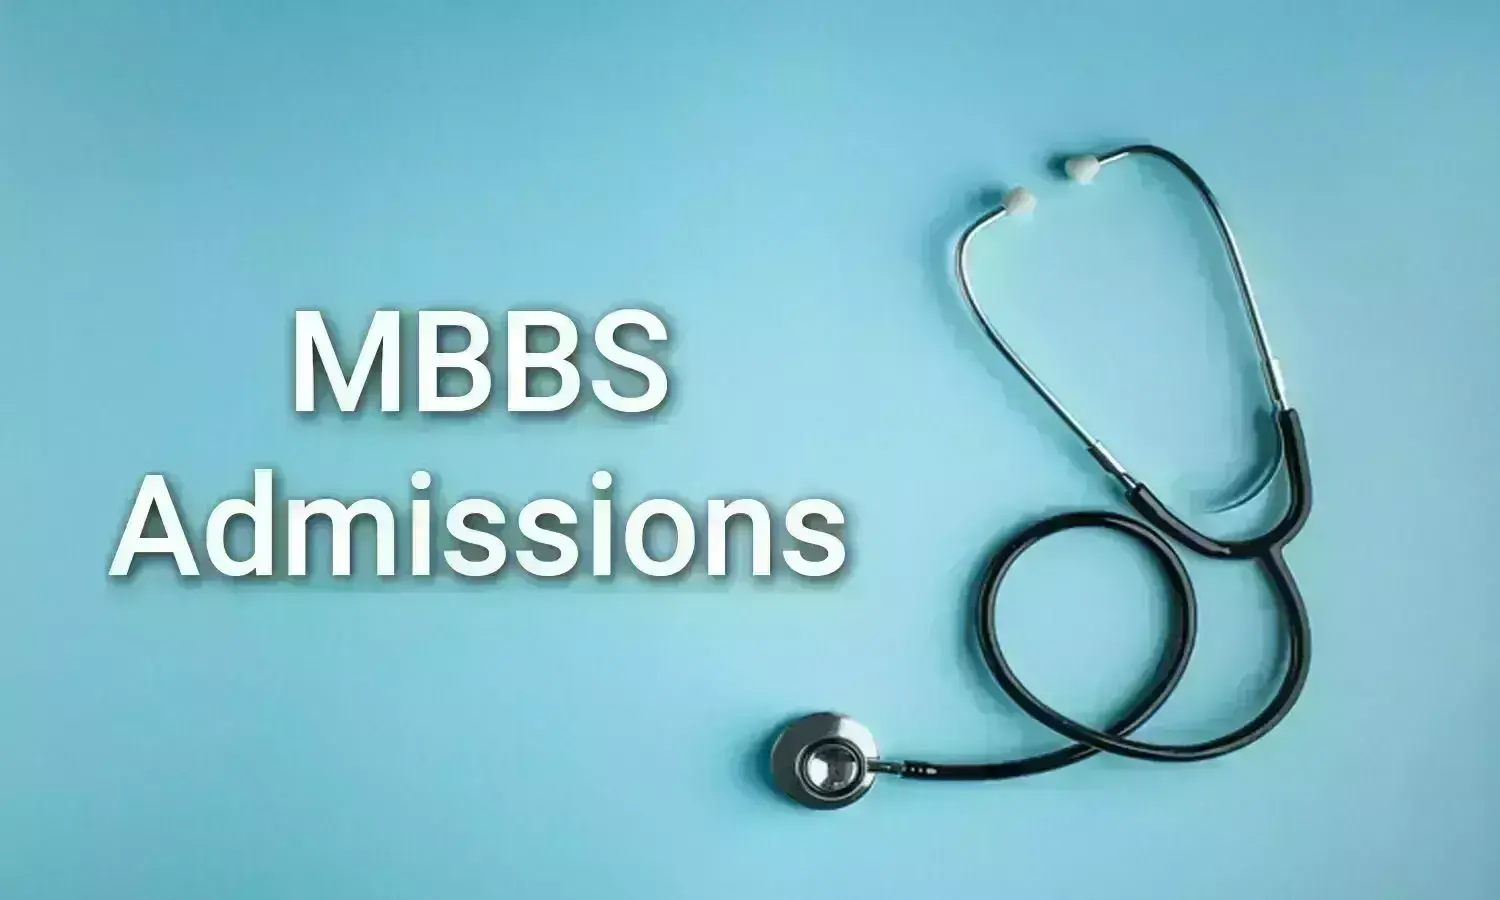 DMER Cancels admission of MBBS student, imposes Rs 10 lakh penalty